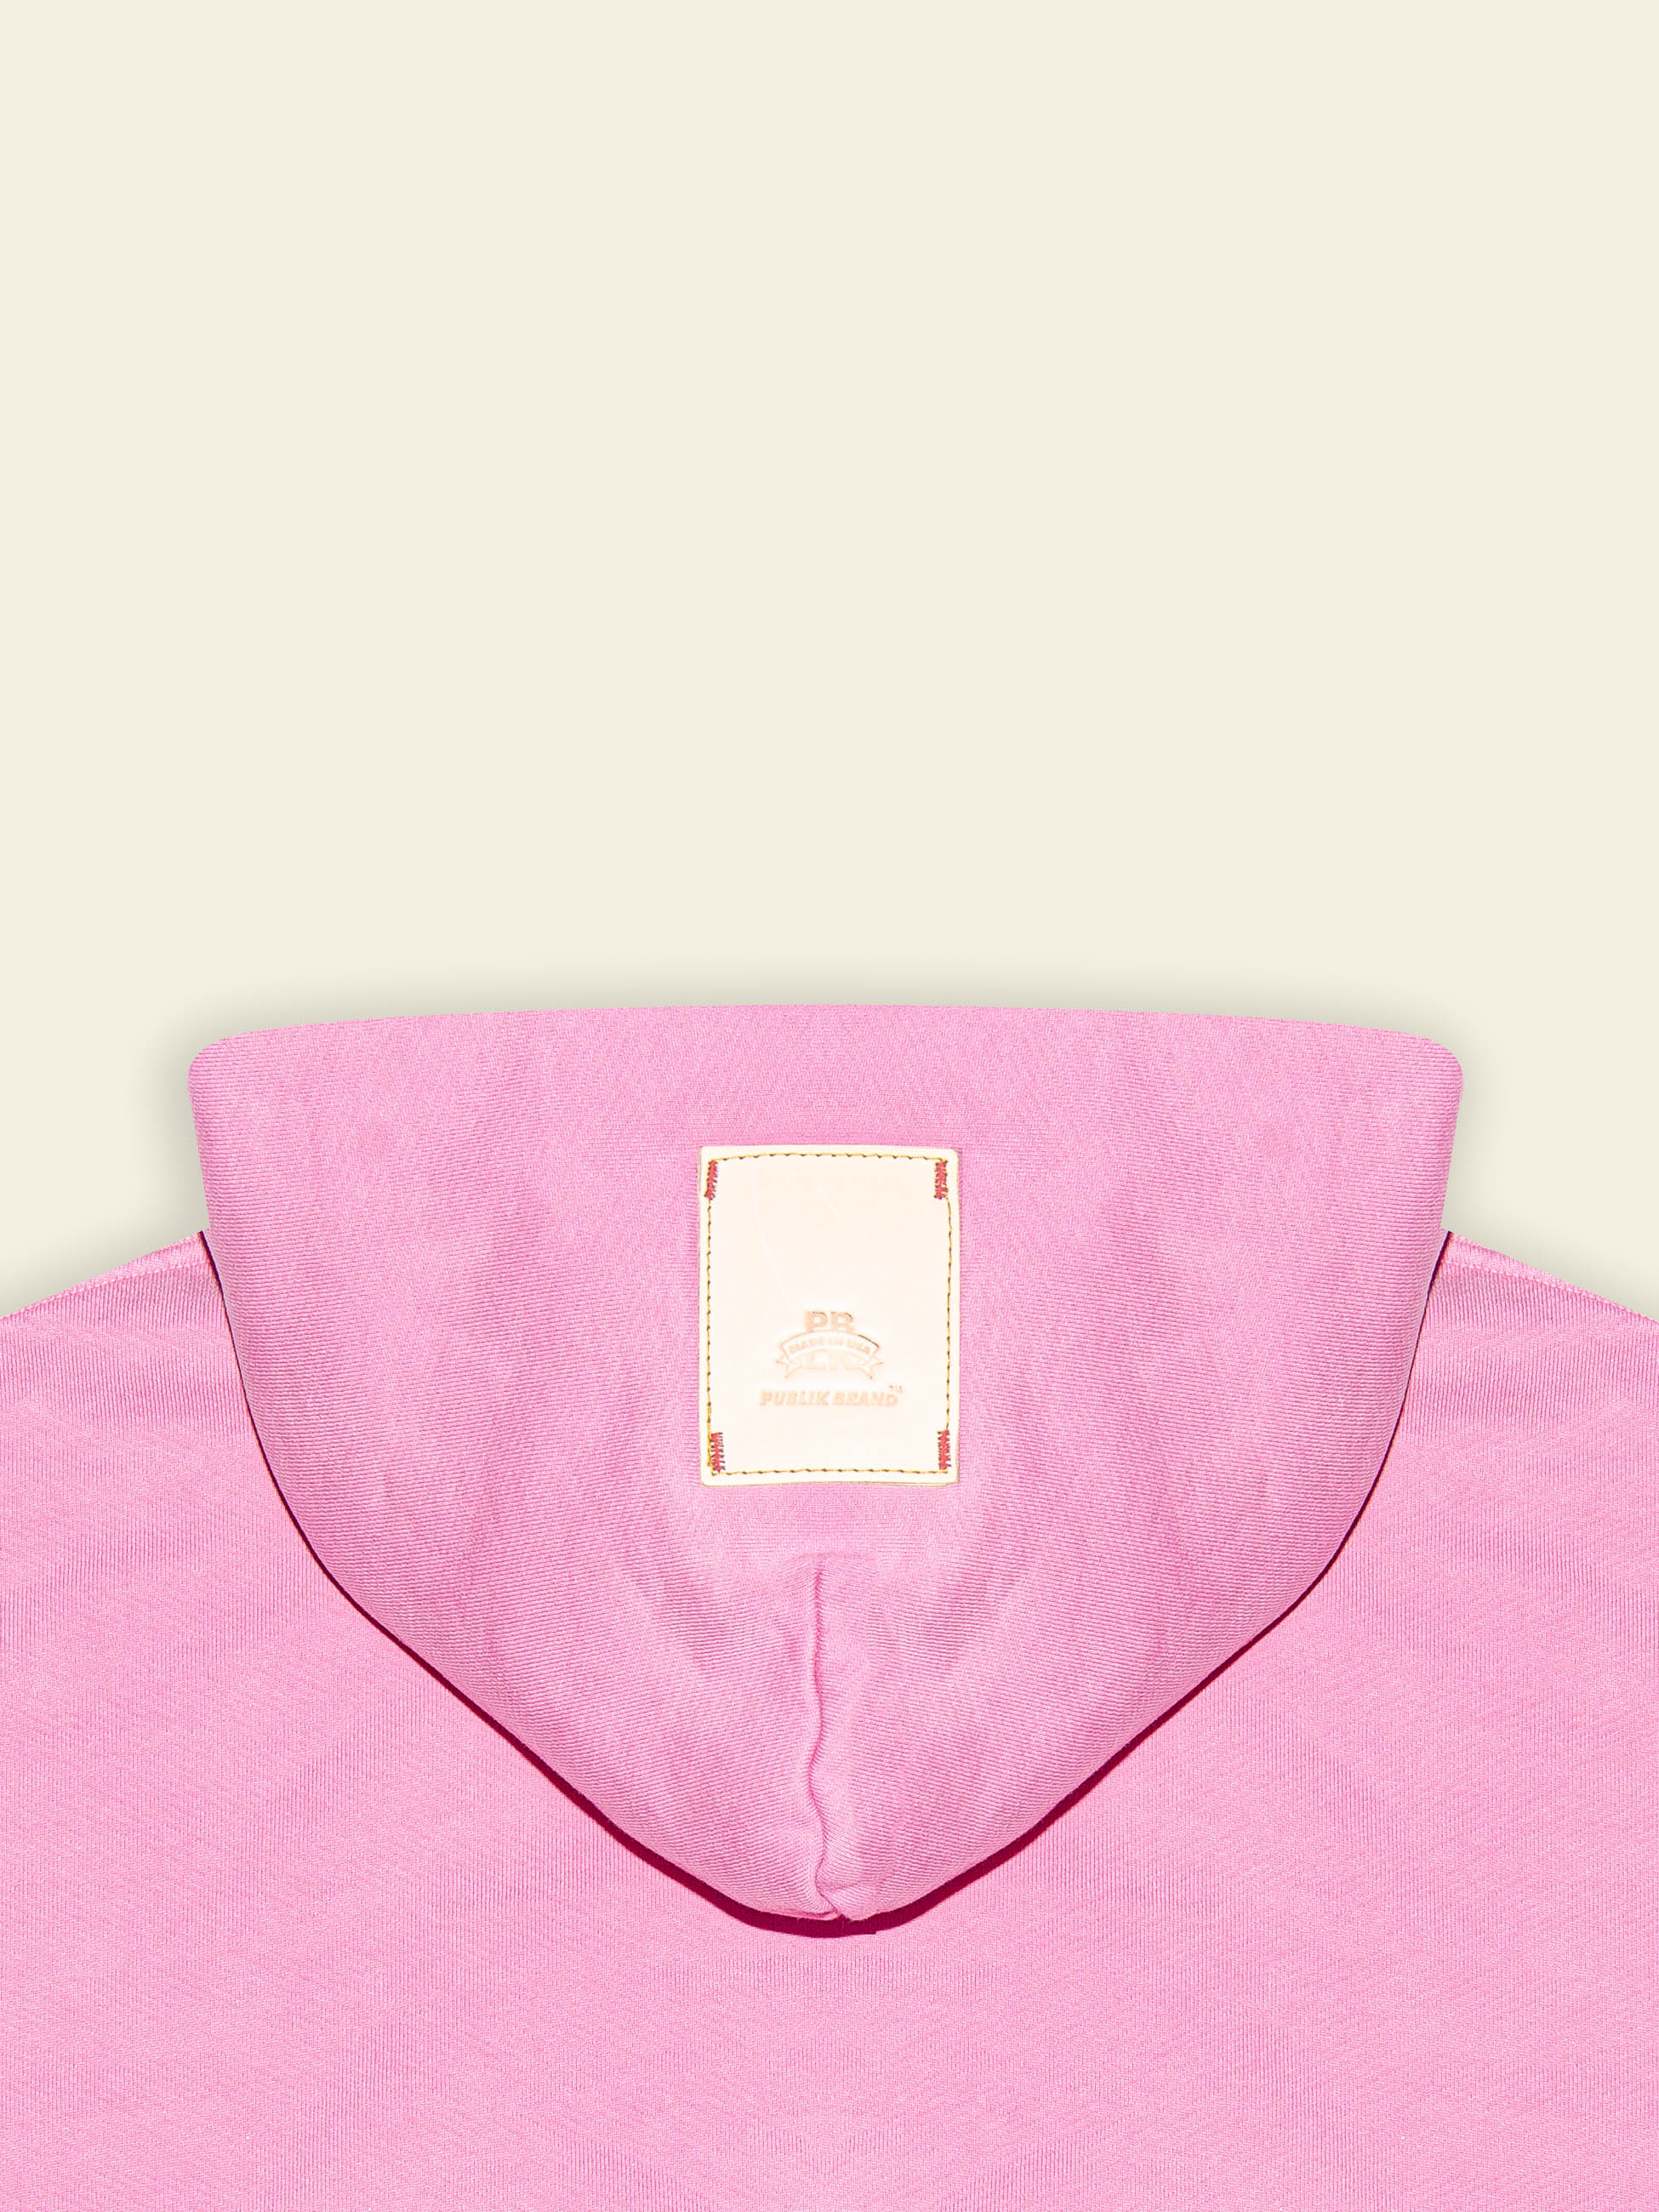 Publik Brand Single Layered Hoodie Hollywood Cerise Pink Heavyweight Fleece, all made in USA, detail of back side